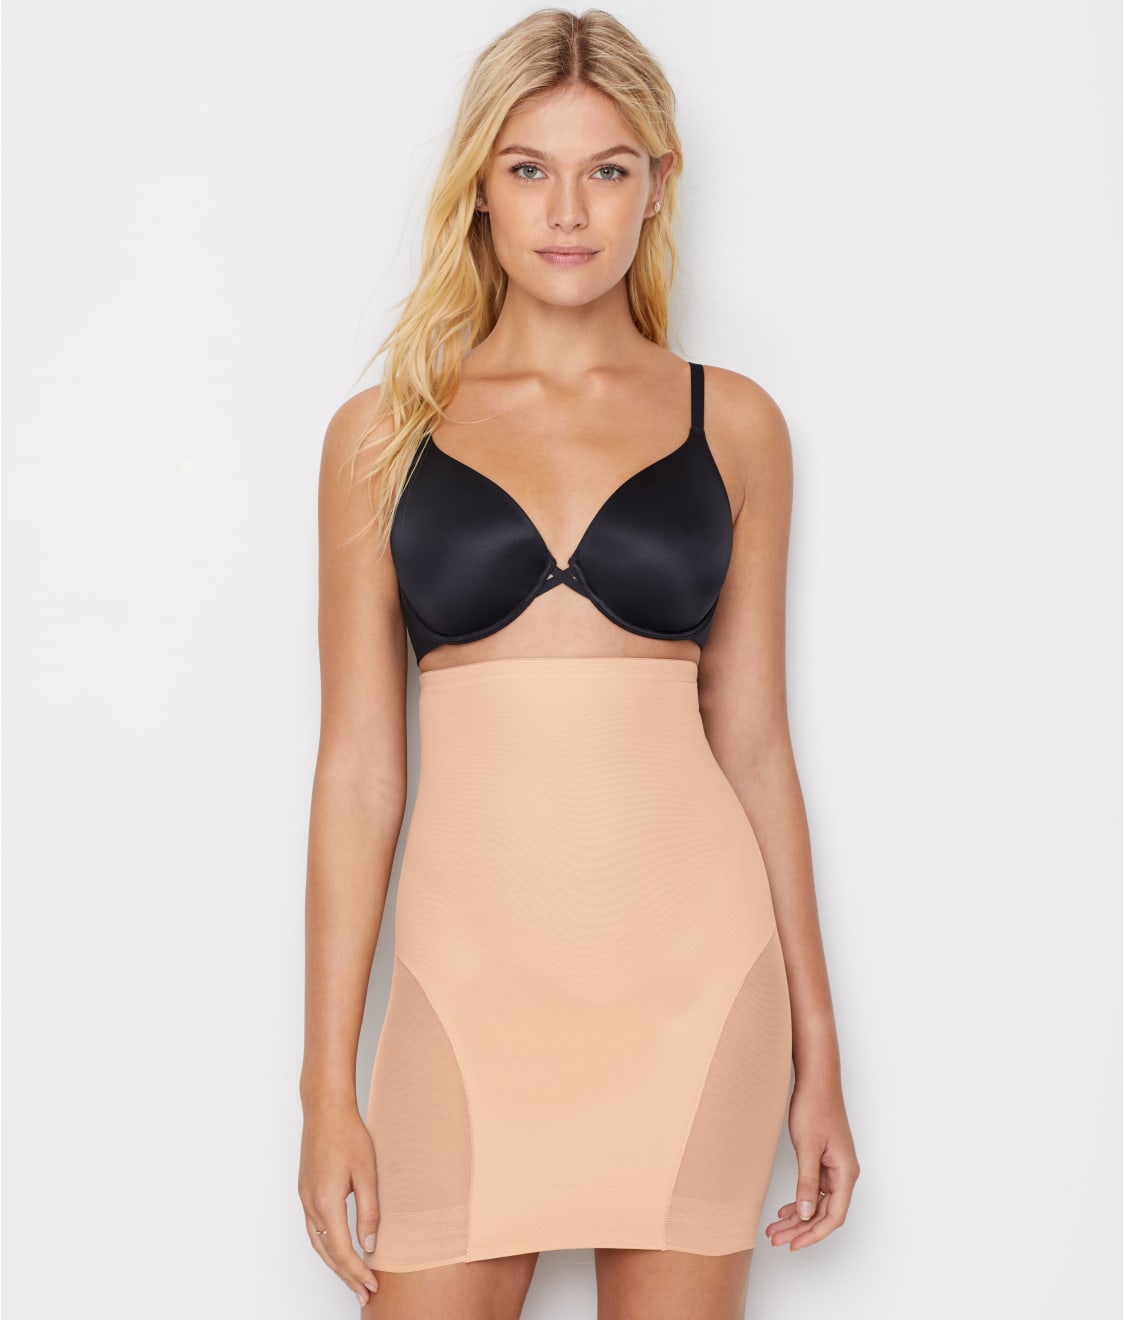 Miraclesuit Sexy Sheer Shaping High Waist Slip: Miraclesuit Slip